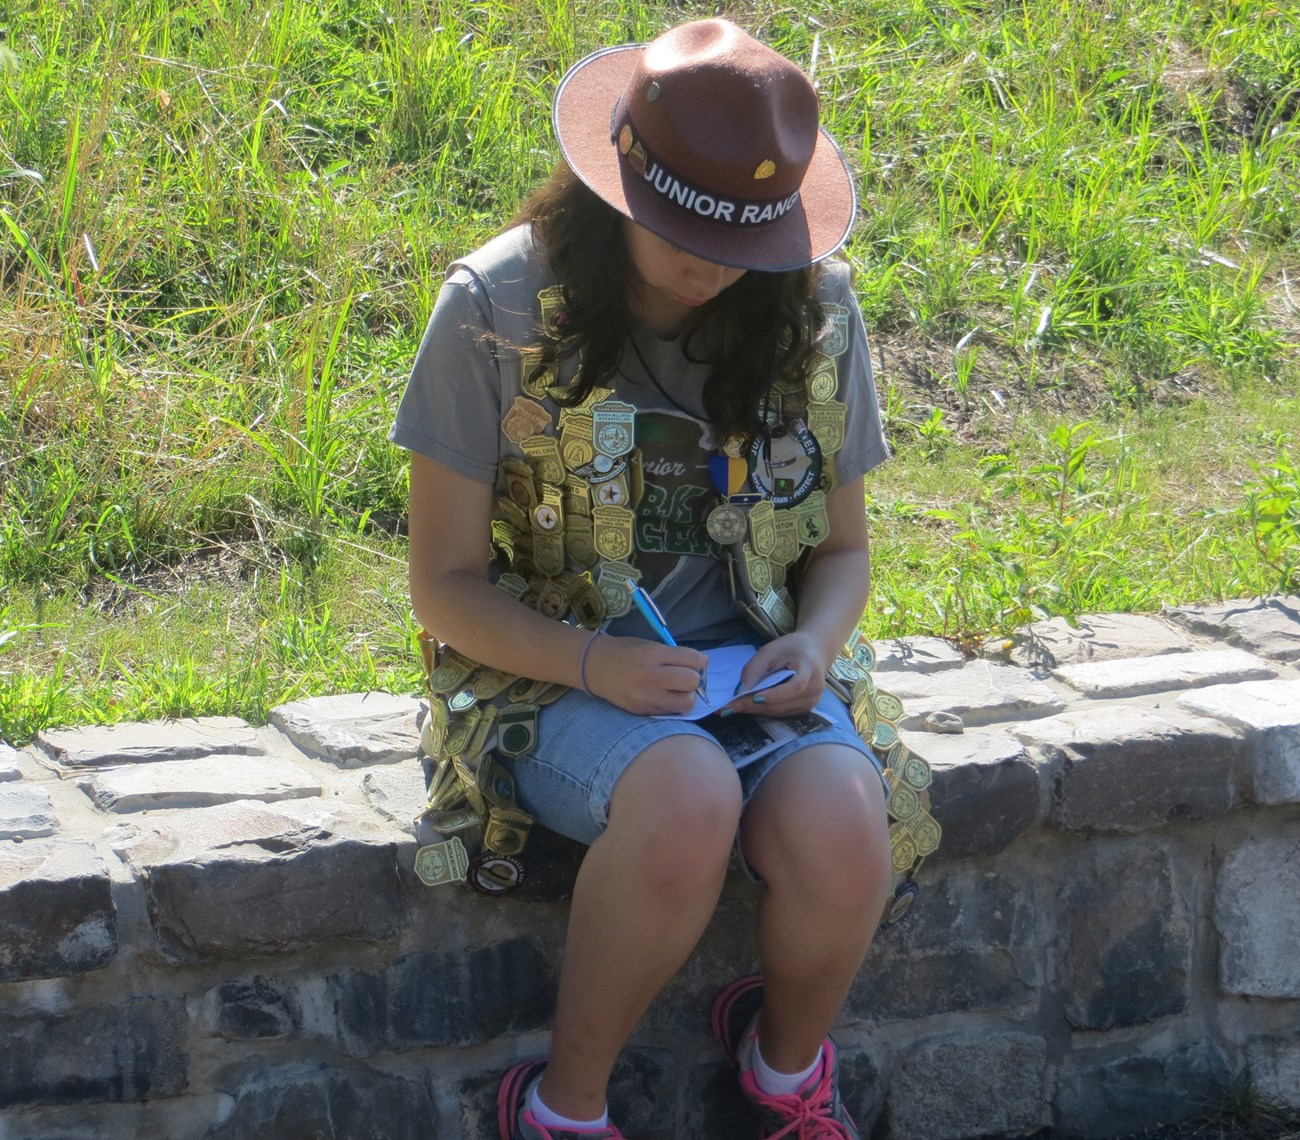 A young girl with a Jr. Ranger flat hat and a vest covered in gold Jr. Ranger badges, patches, & ribbons sits on a wall completing an activity book